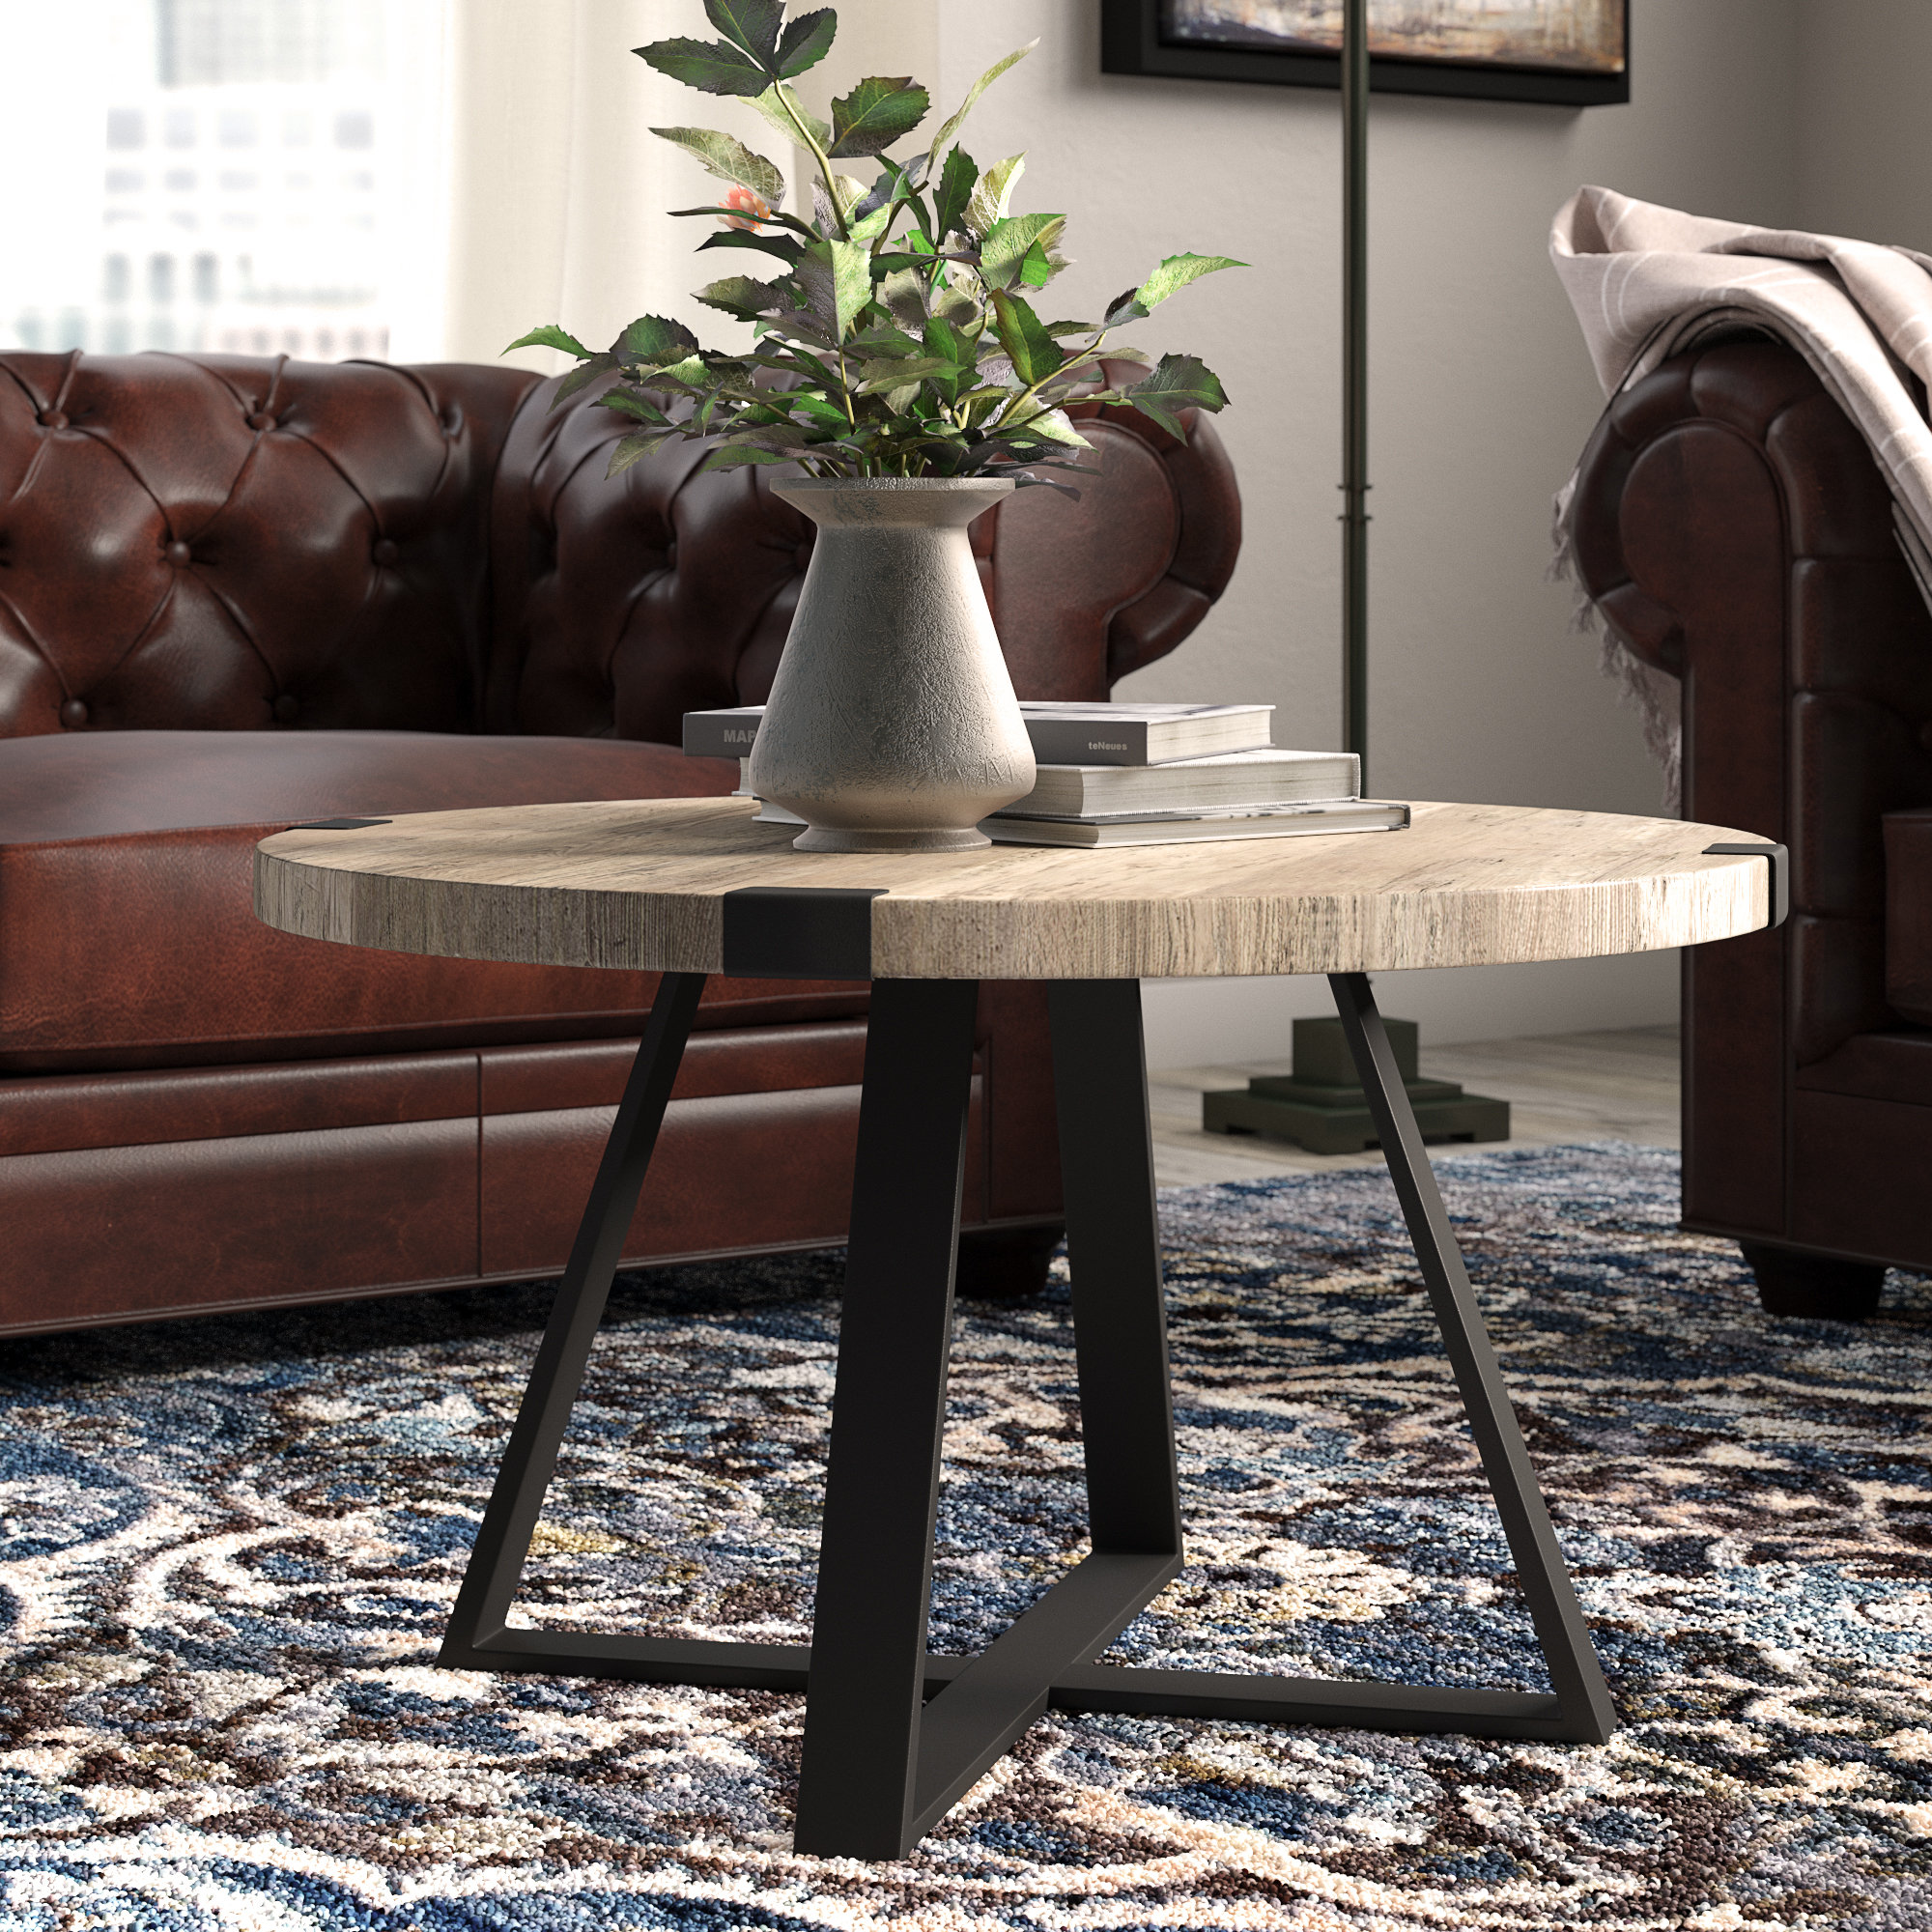 williston forge bowden metal wrap coffee table reviews solar accent junior drum stool mcm side nesting tables brown leather ott wood top target glass apartment decor chrome indoor